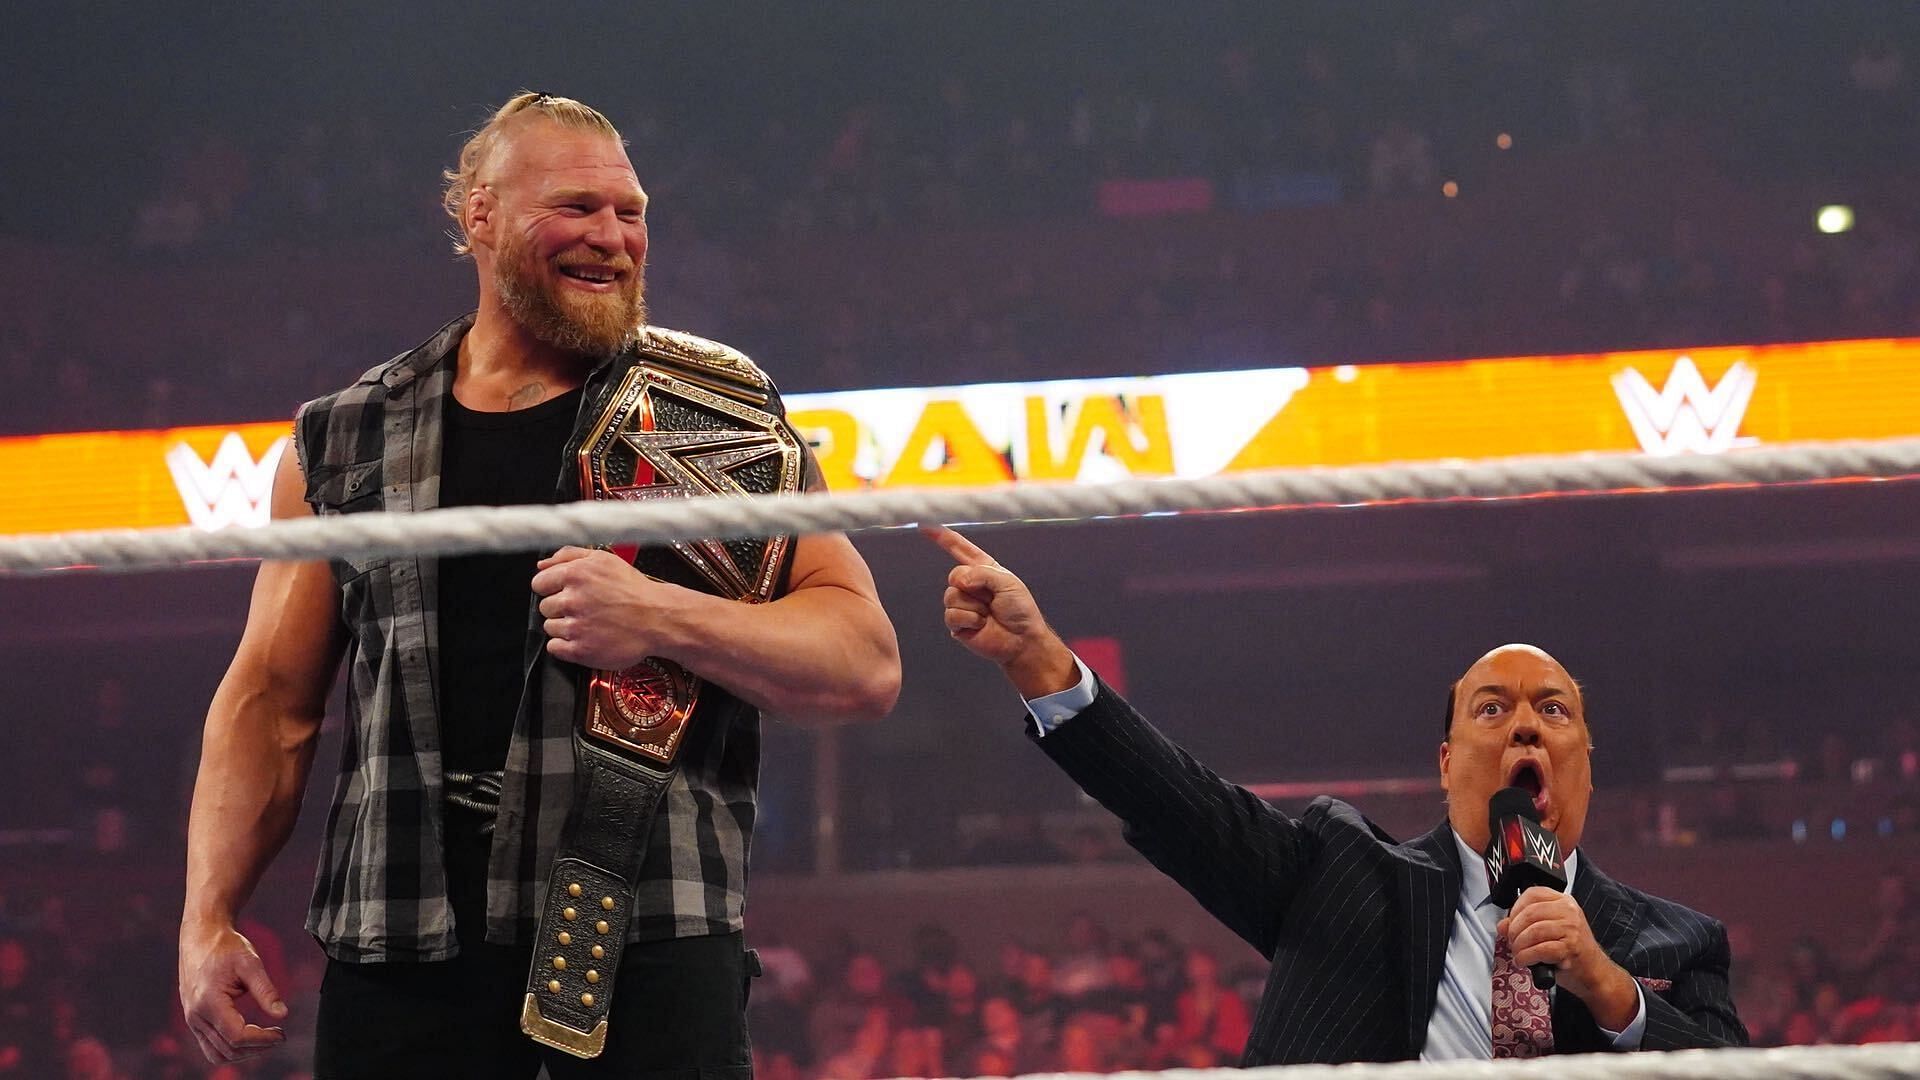 Heyman and Lesnar are back together!